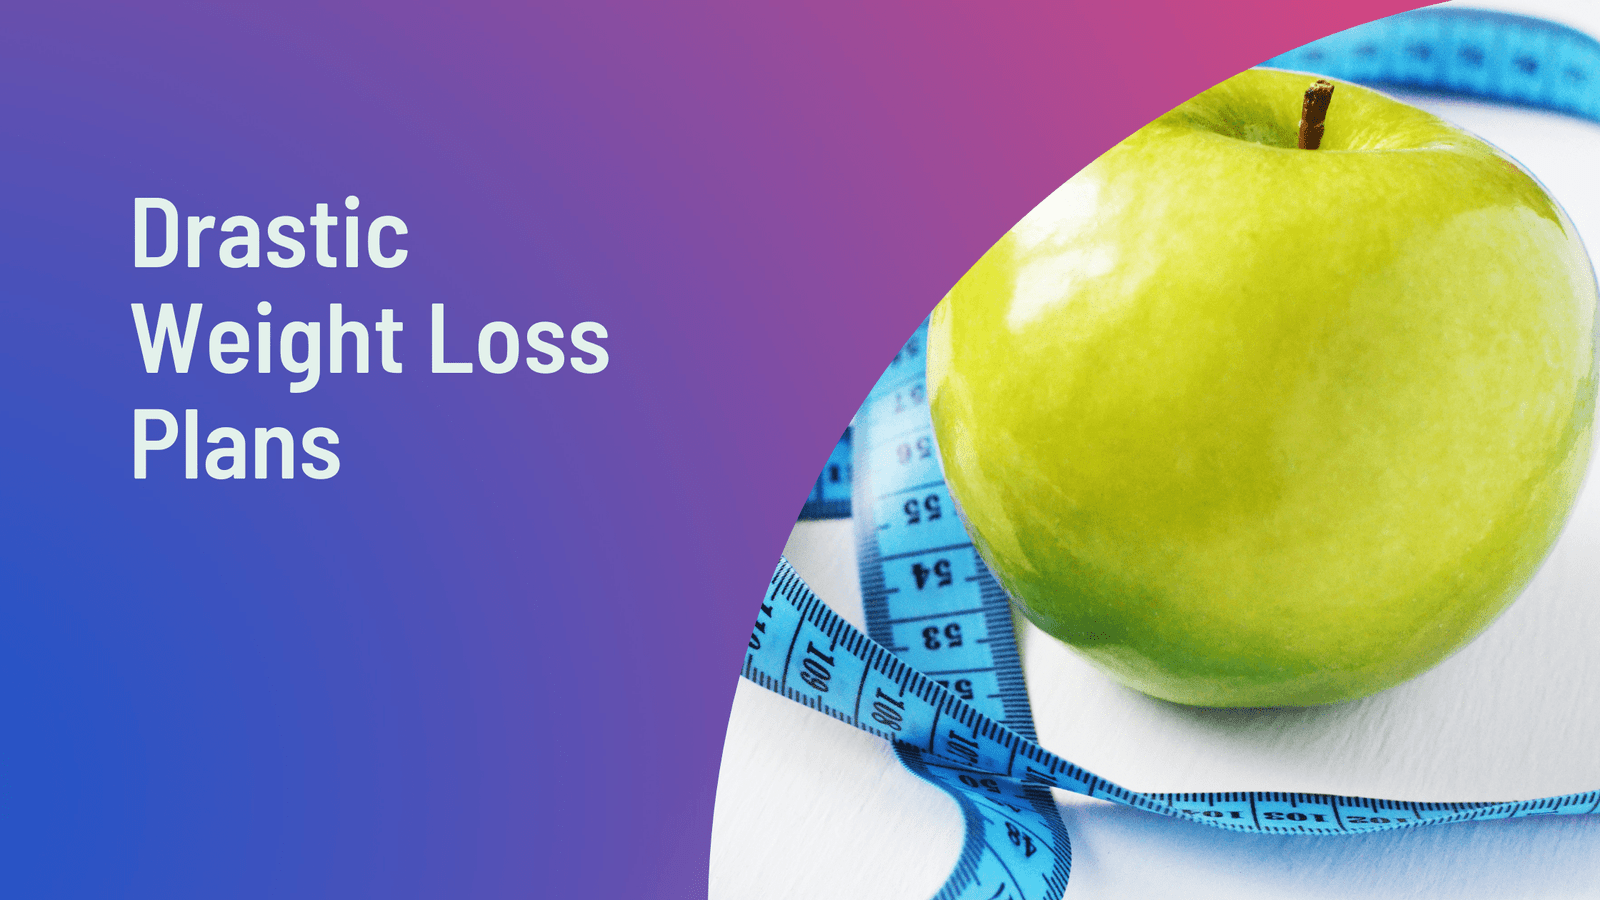 Drastic Weight Loss Plans